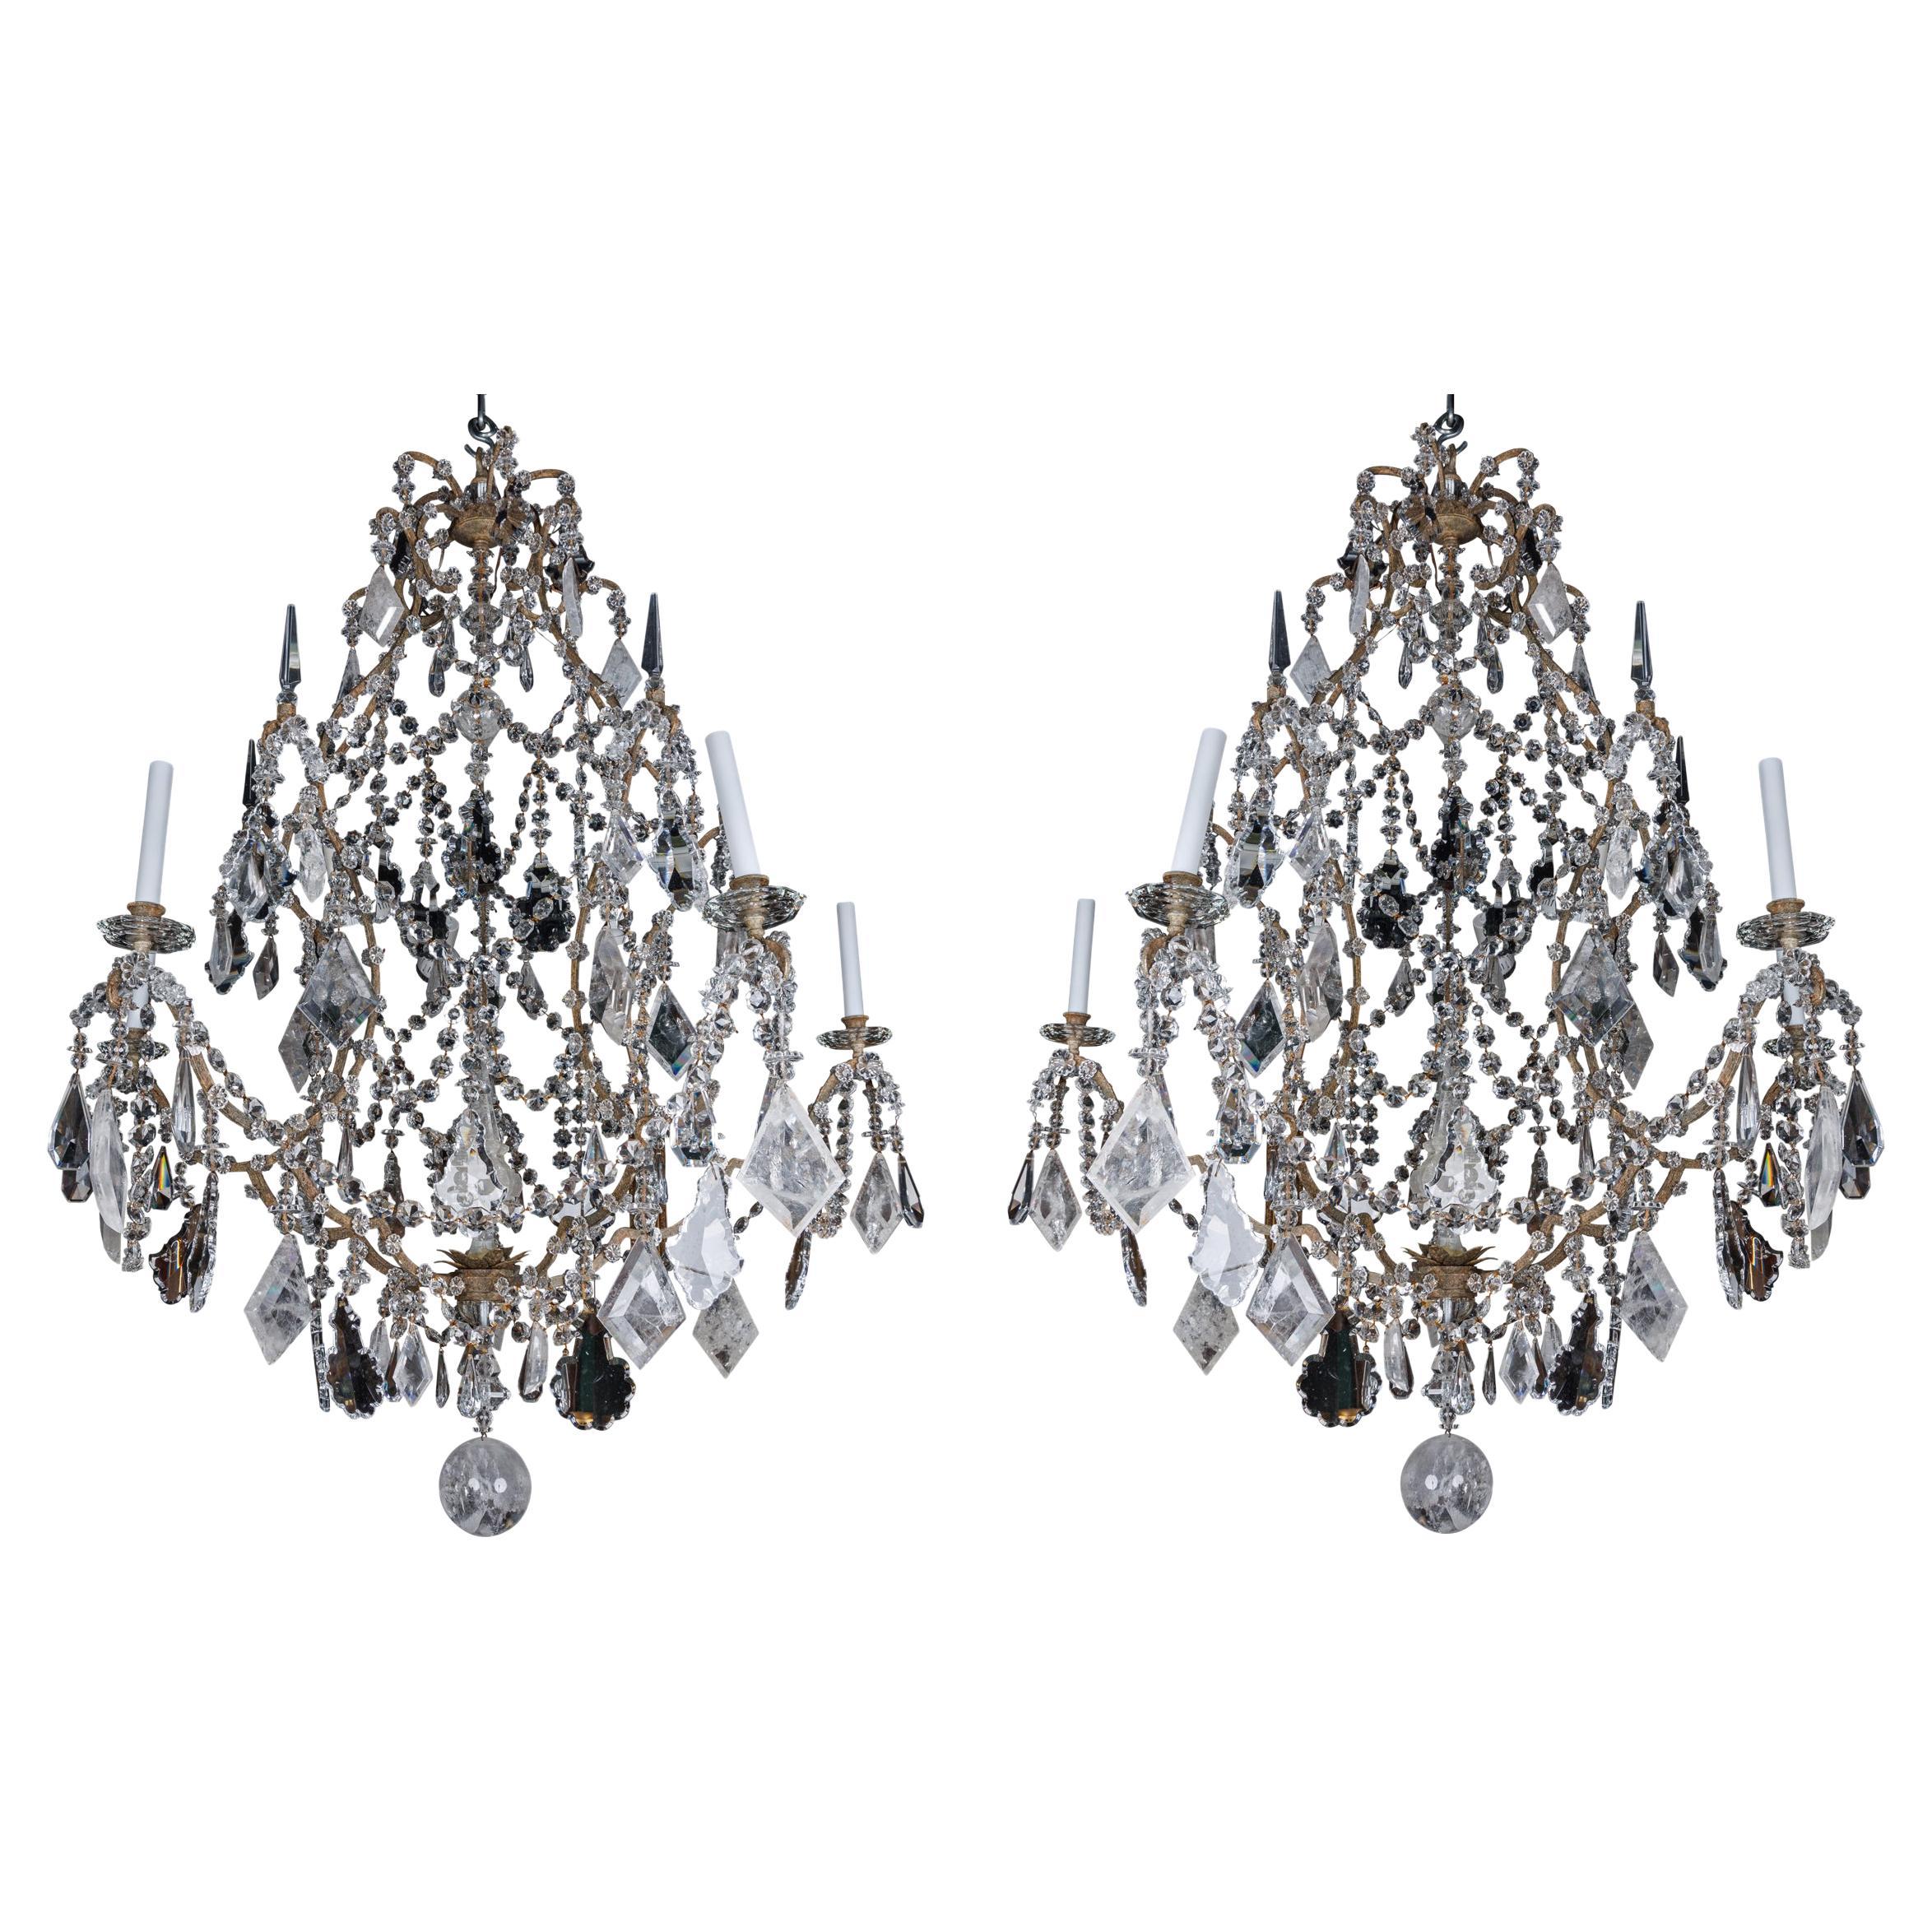 A Large and Exceptional Pair of French Rock Crystal and Glass Chandeliers For Sale